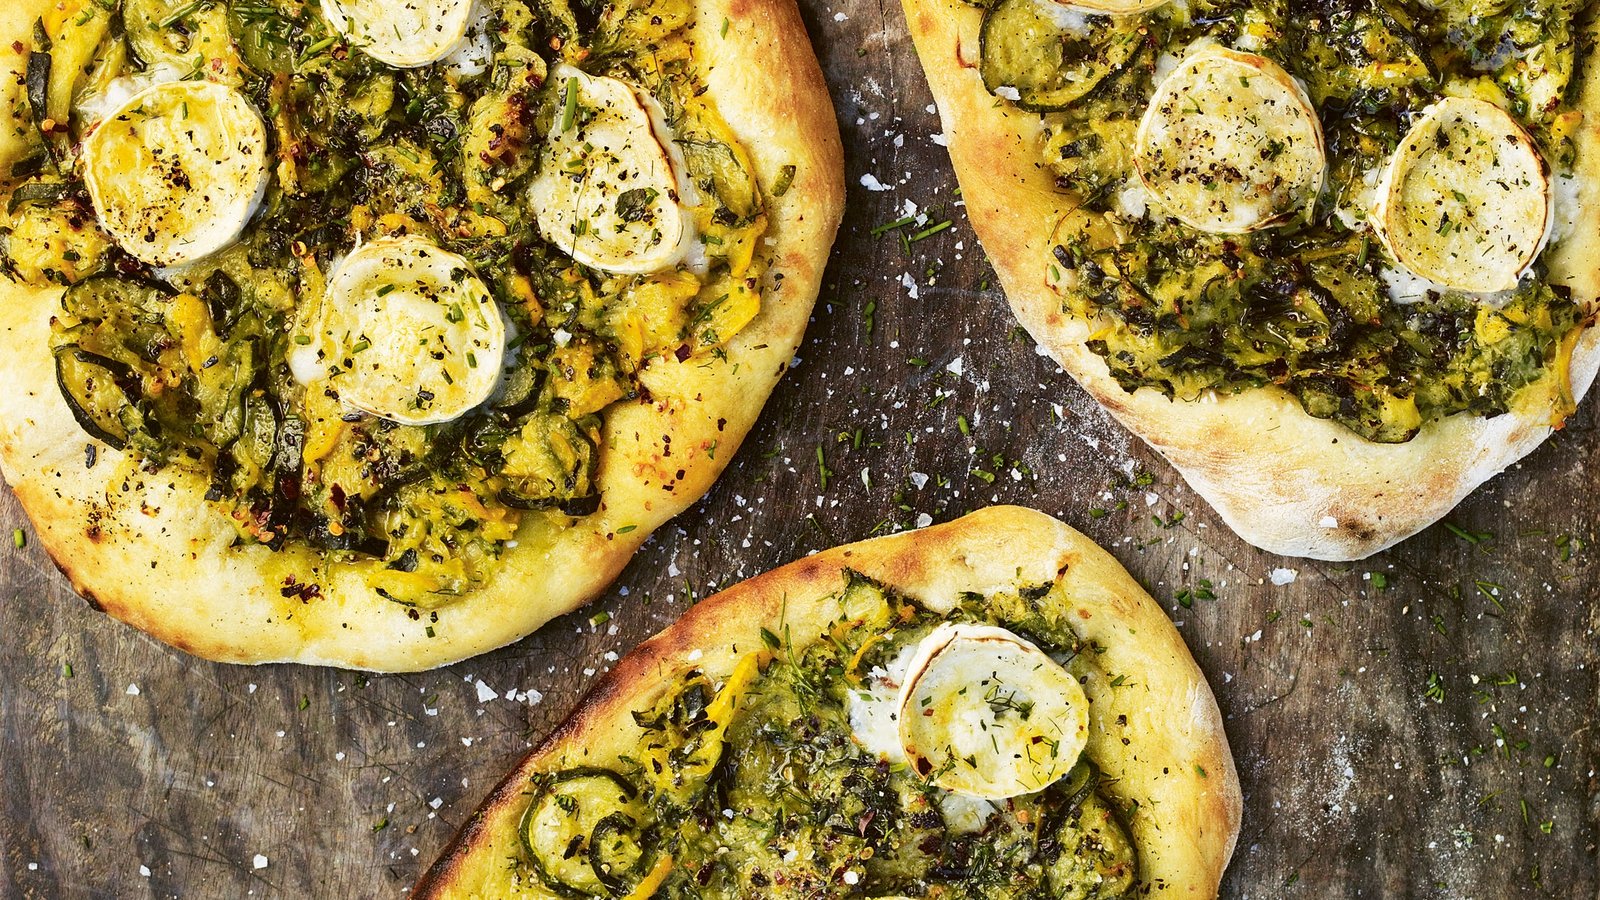 Courgette flatbreads recipe with herbs and goat's cheese